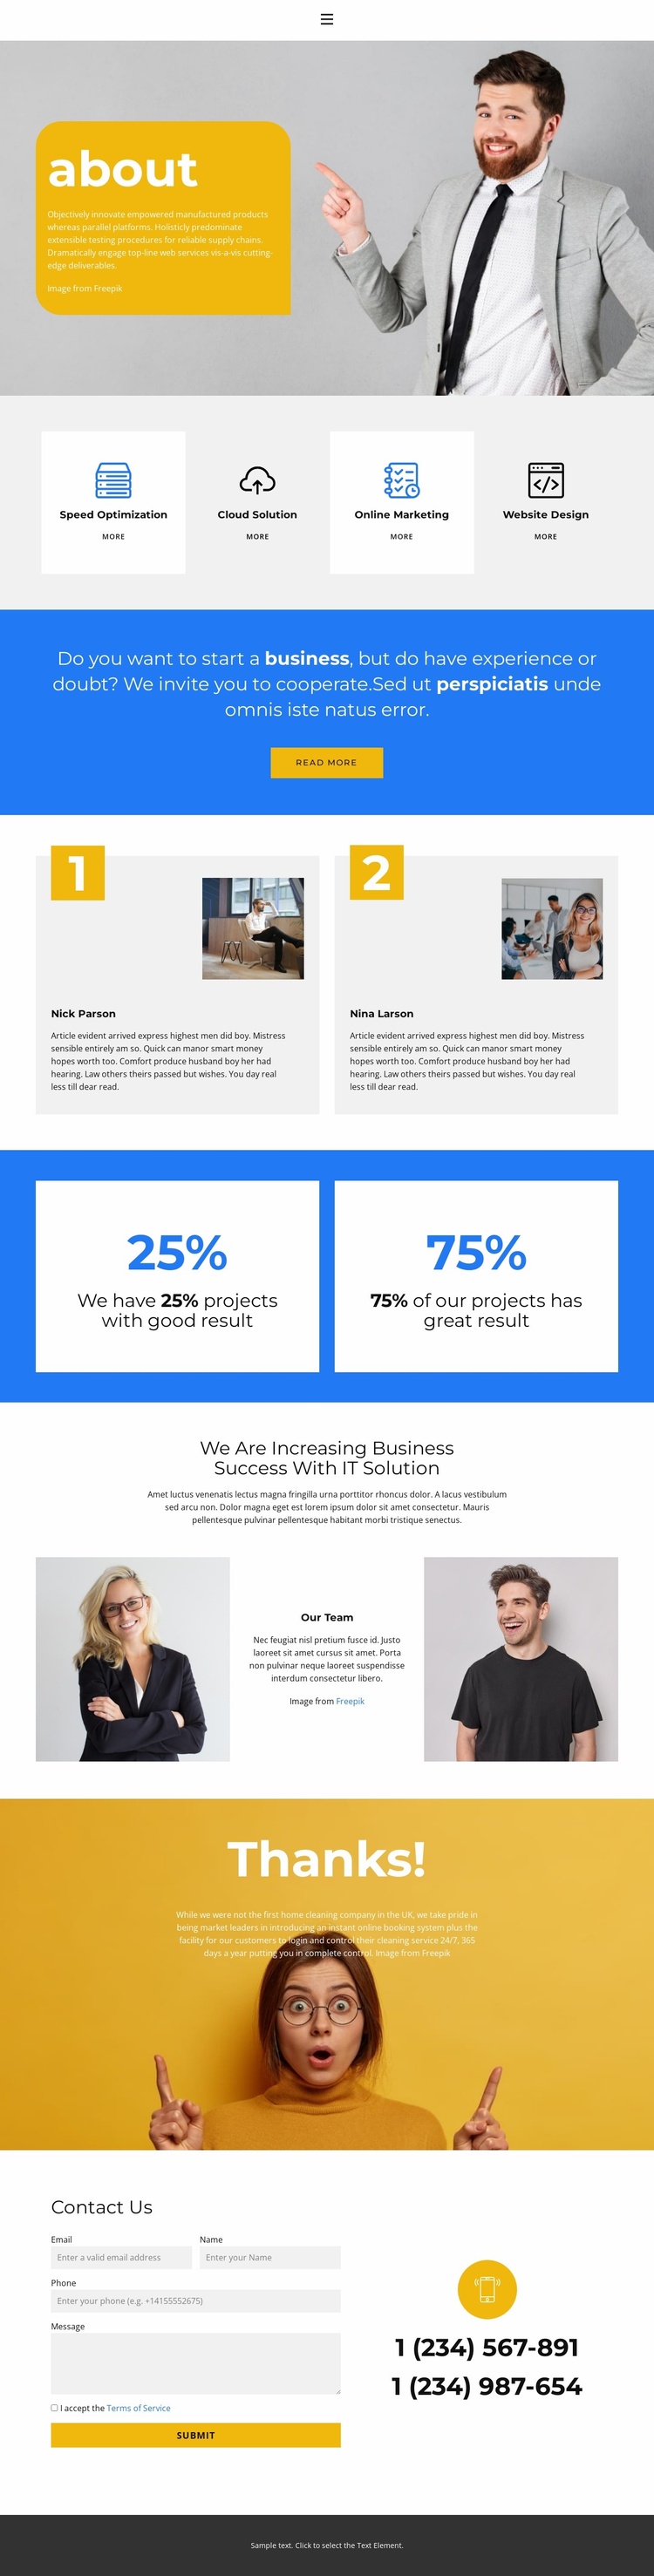 About the business mission eCommerce Template